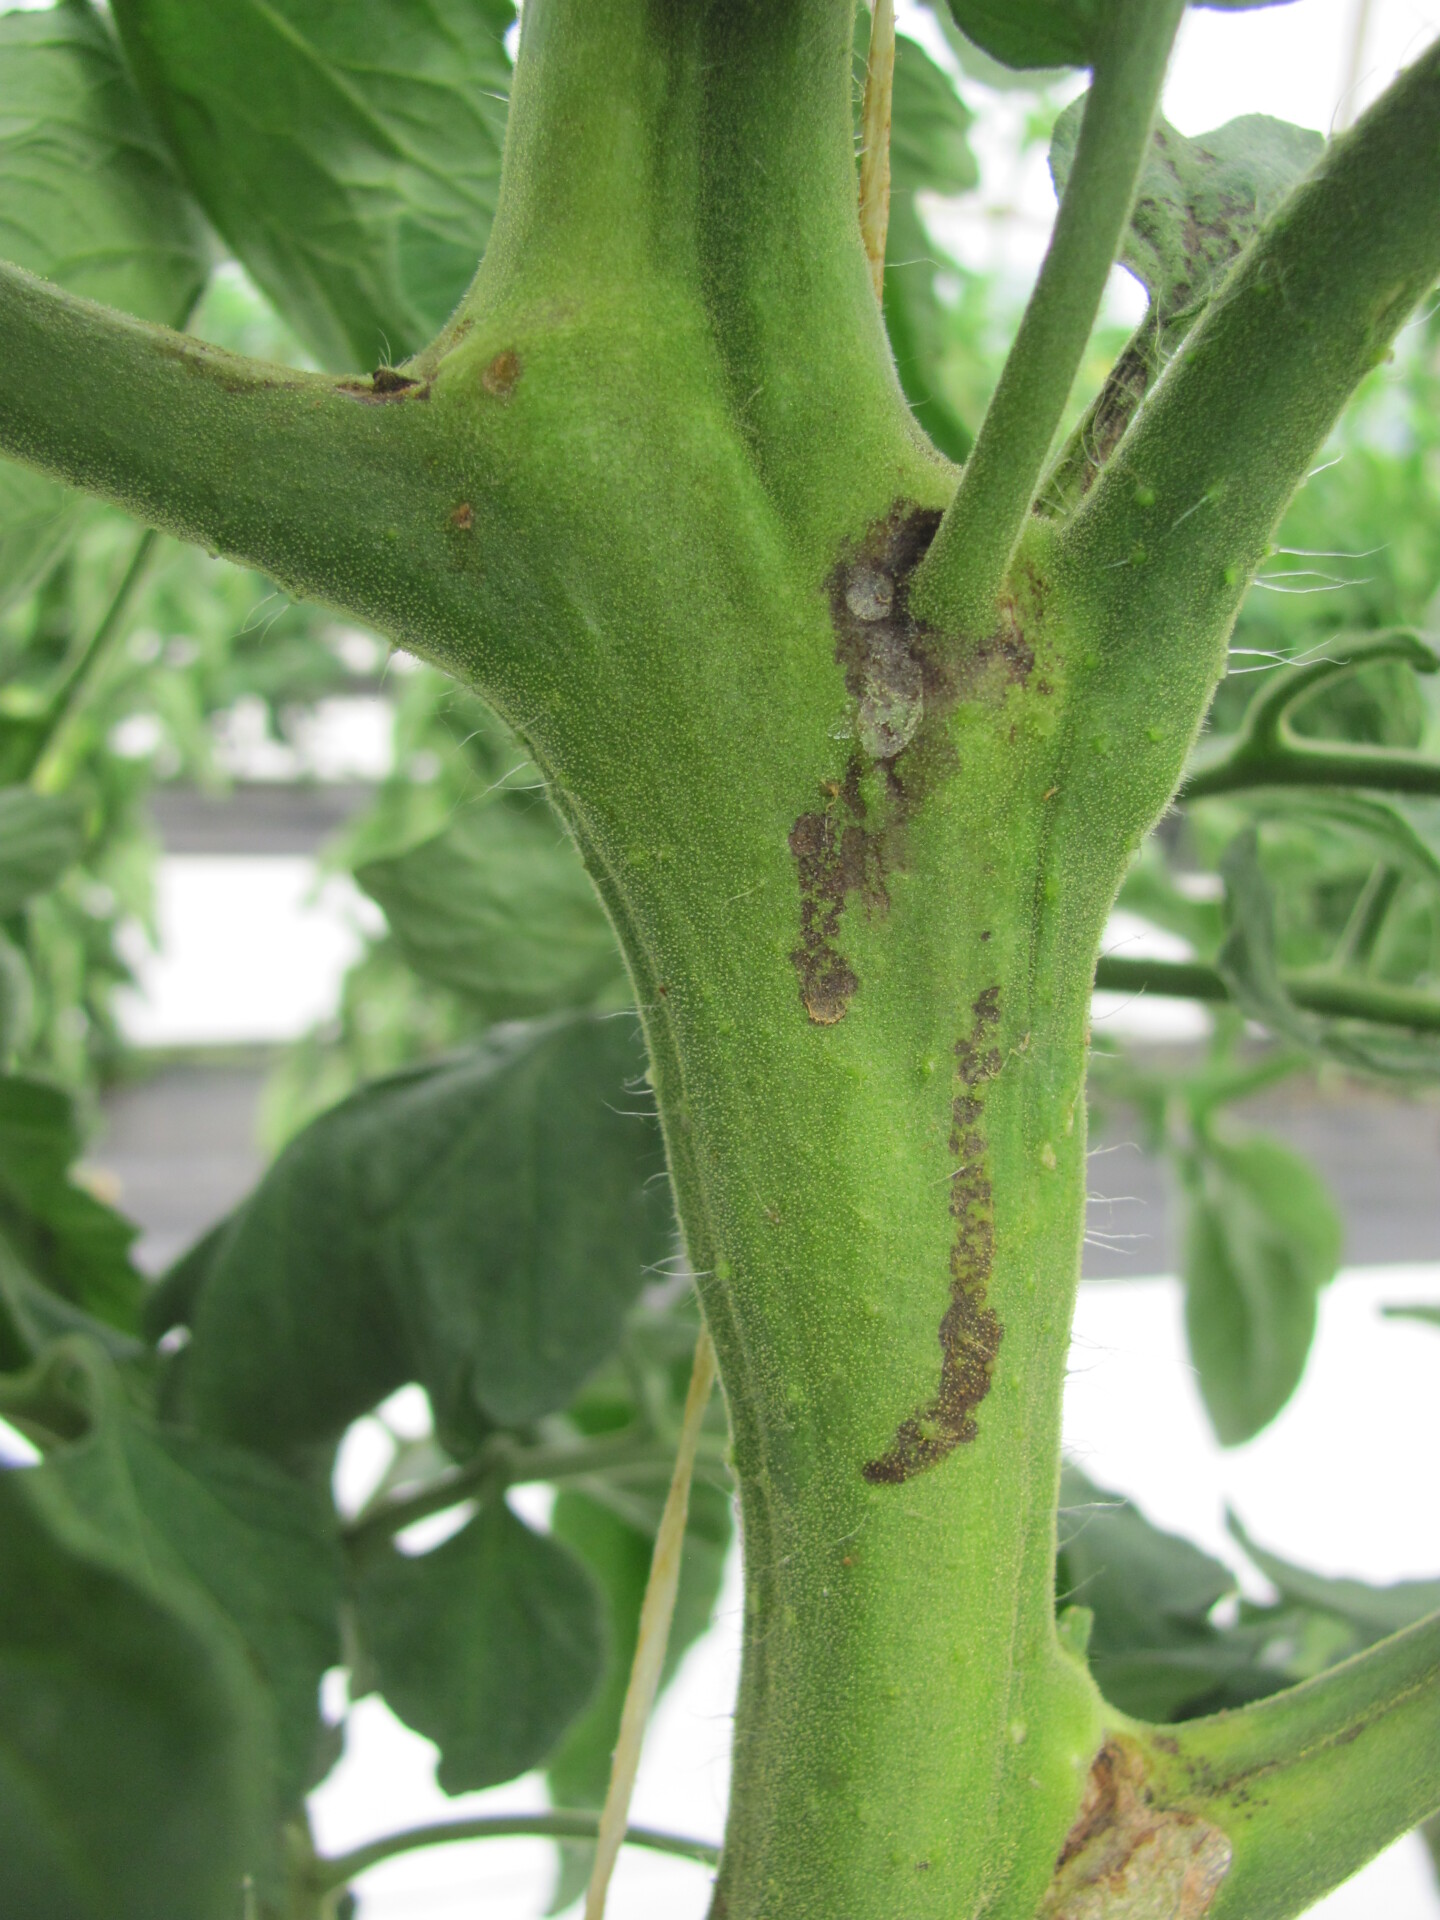  Initial symptoms of pith necrosis of tomato may appear to be minor necrosis on the stem.